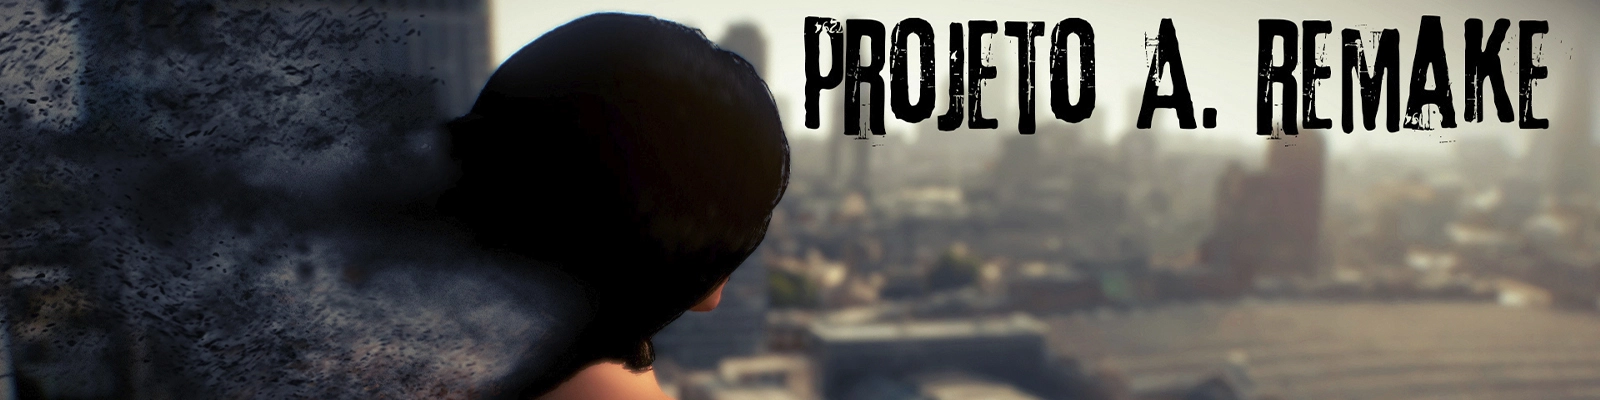 Project A. Remake main image